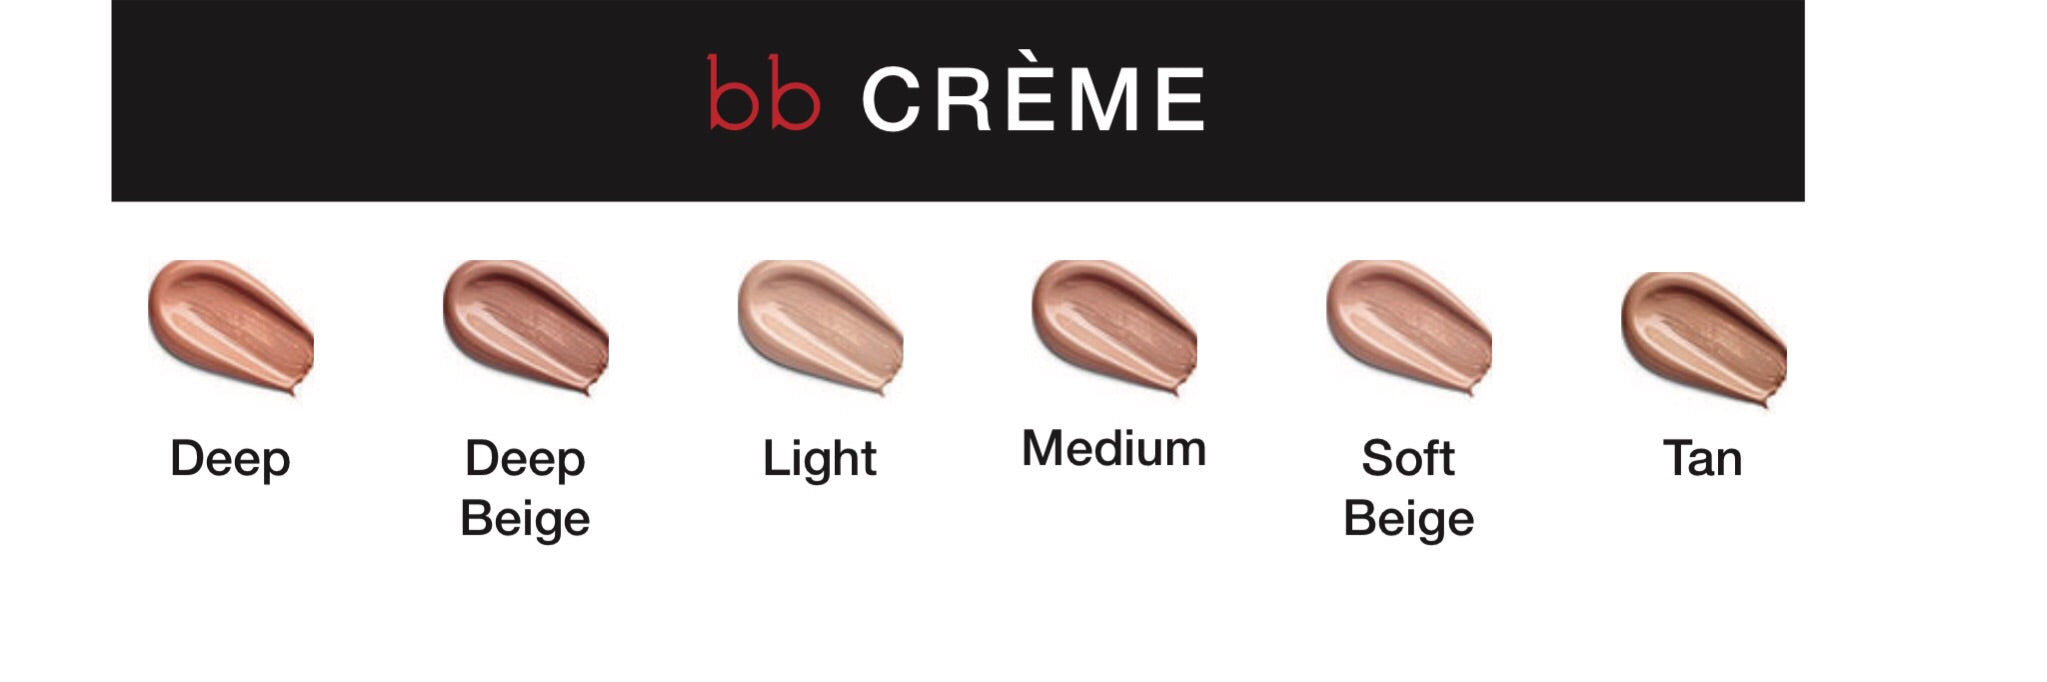 BB Crème new and improved colors